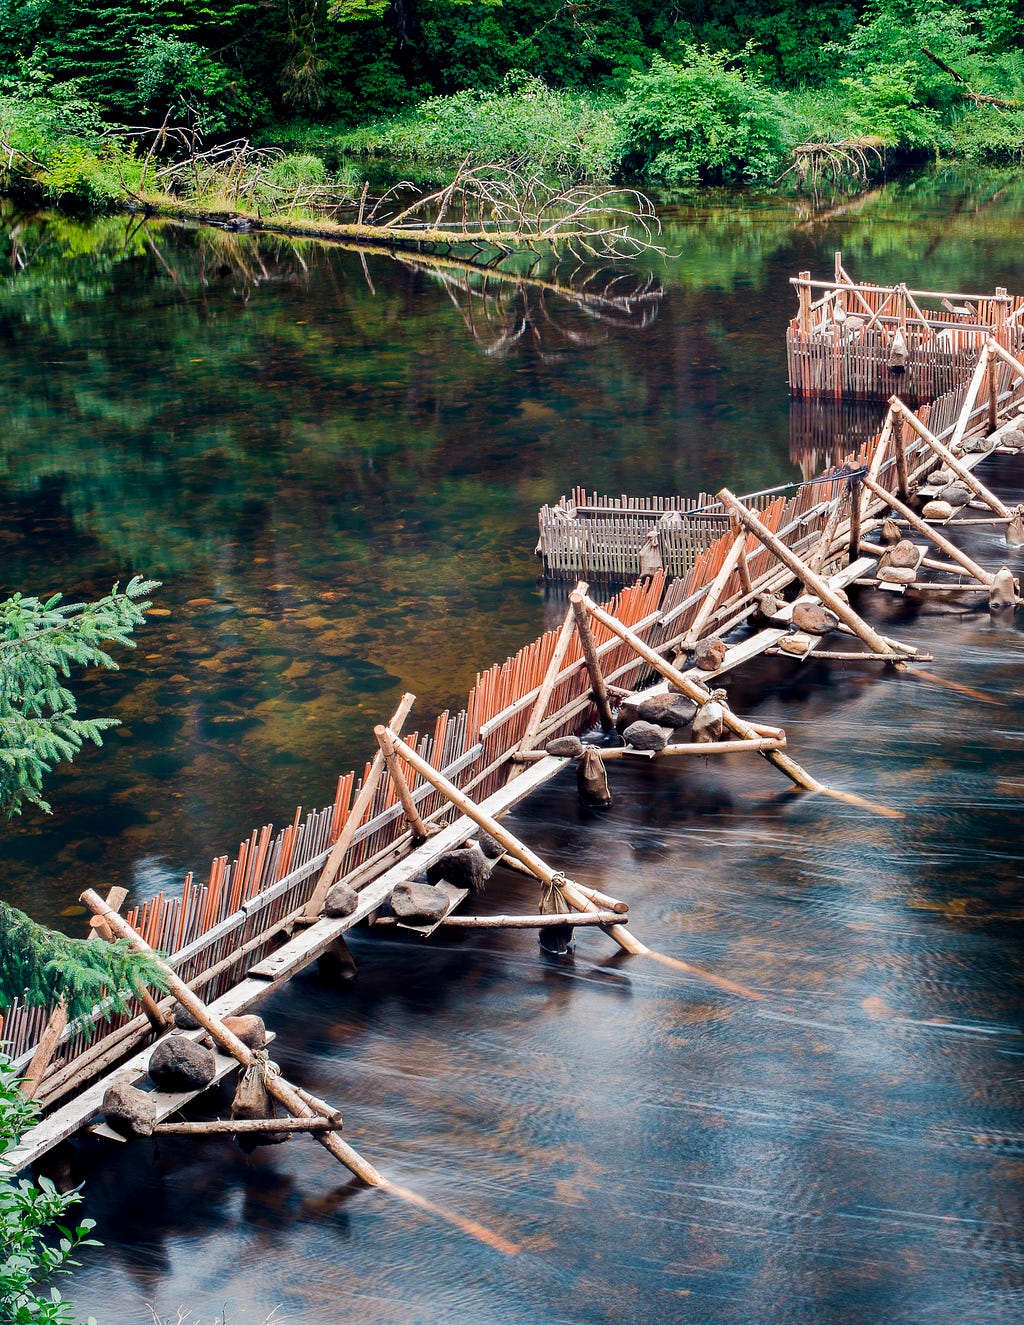 A shallow river with a dam made from wood and stones.